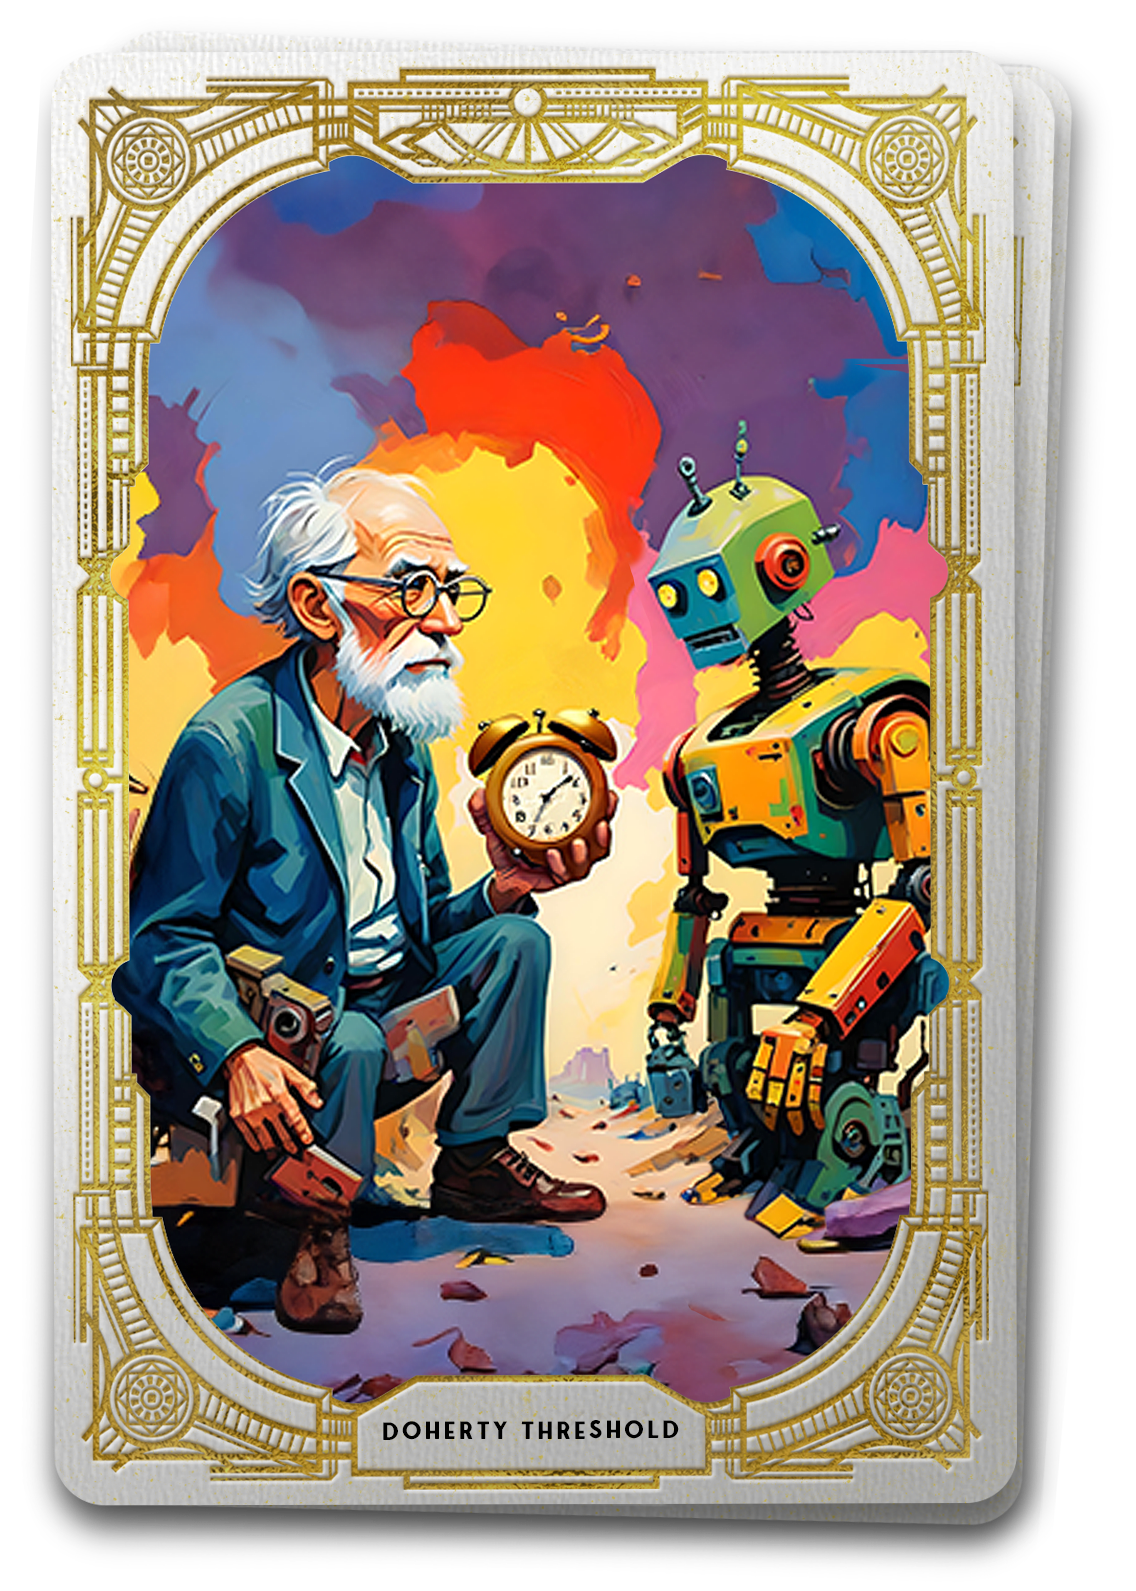 A Tarot Card featuring the image of an old man and an antiquated robot are frustrated with each other over delays illustrating the nature of the Doherty Threshold in UX design.